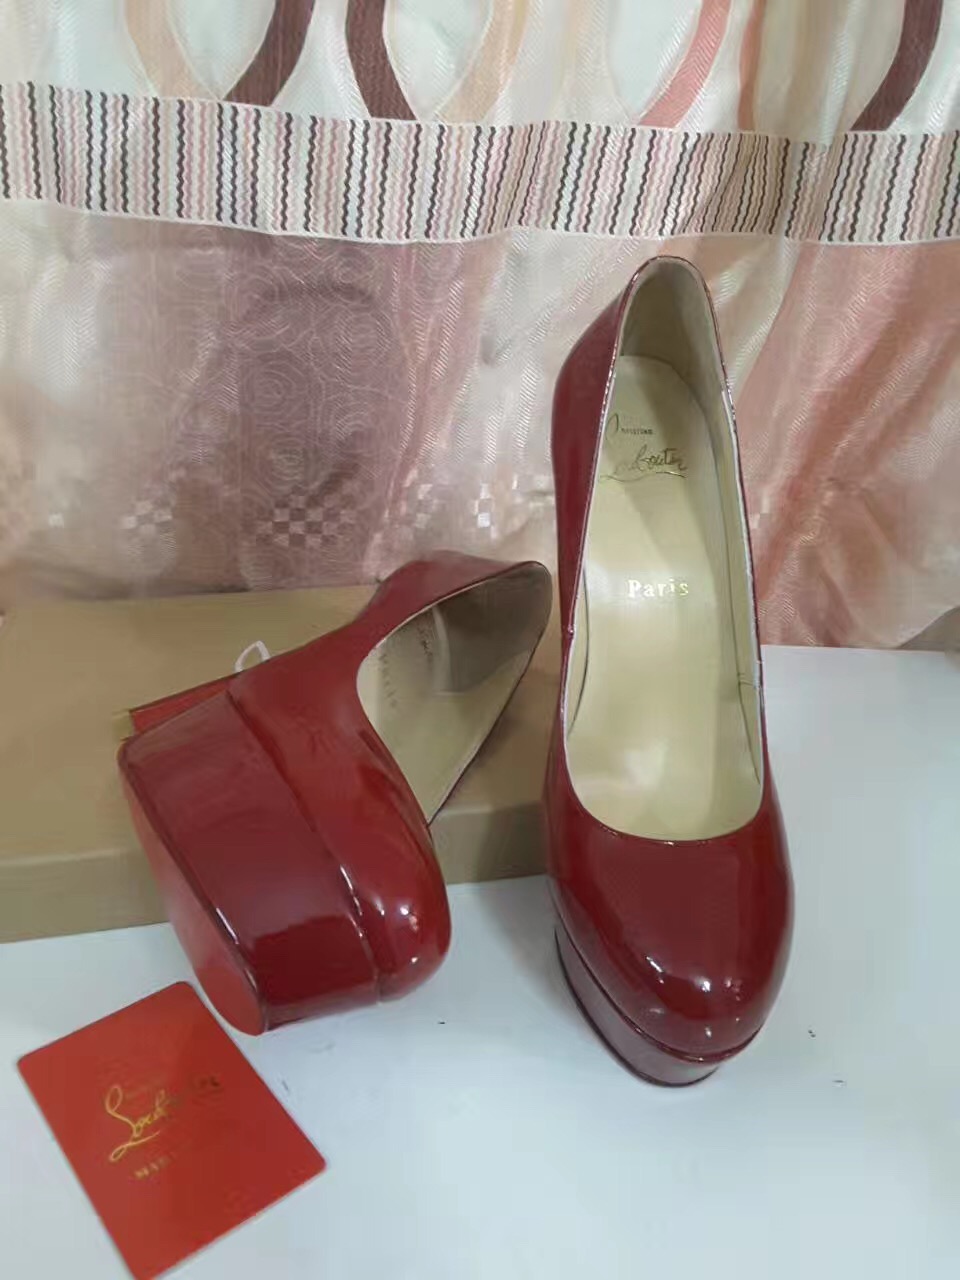 Christian Louboutin 13cm red heels sandals shoes